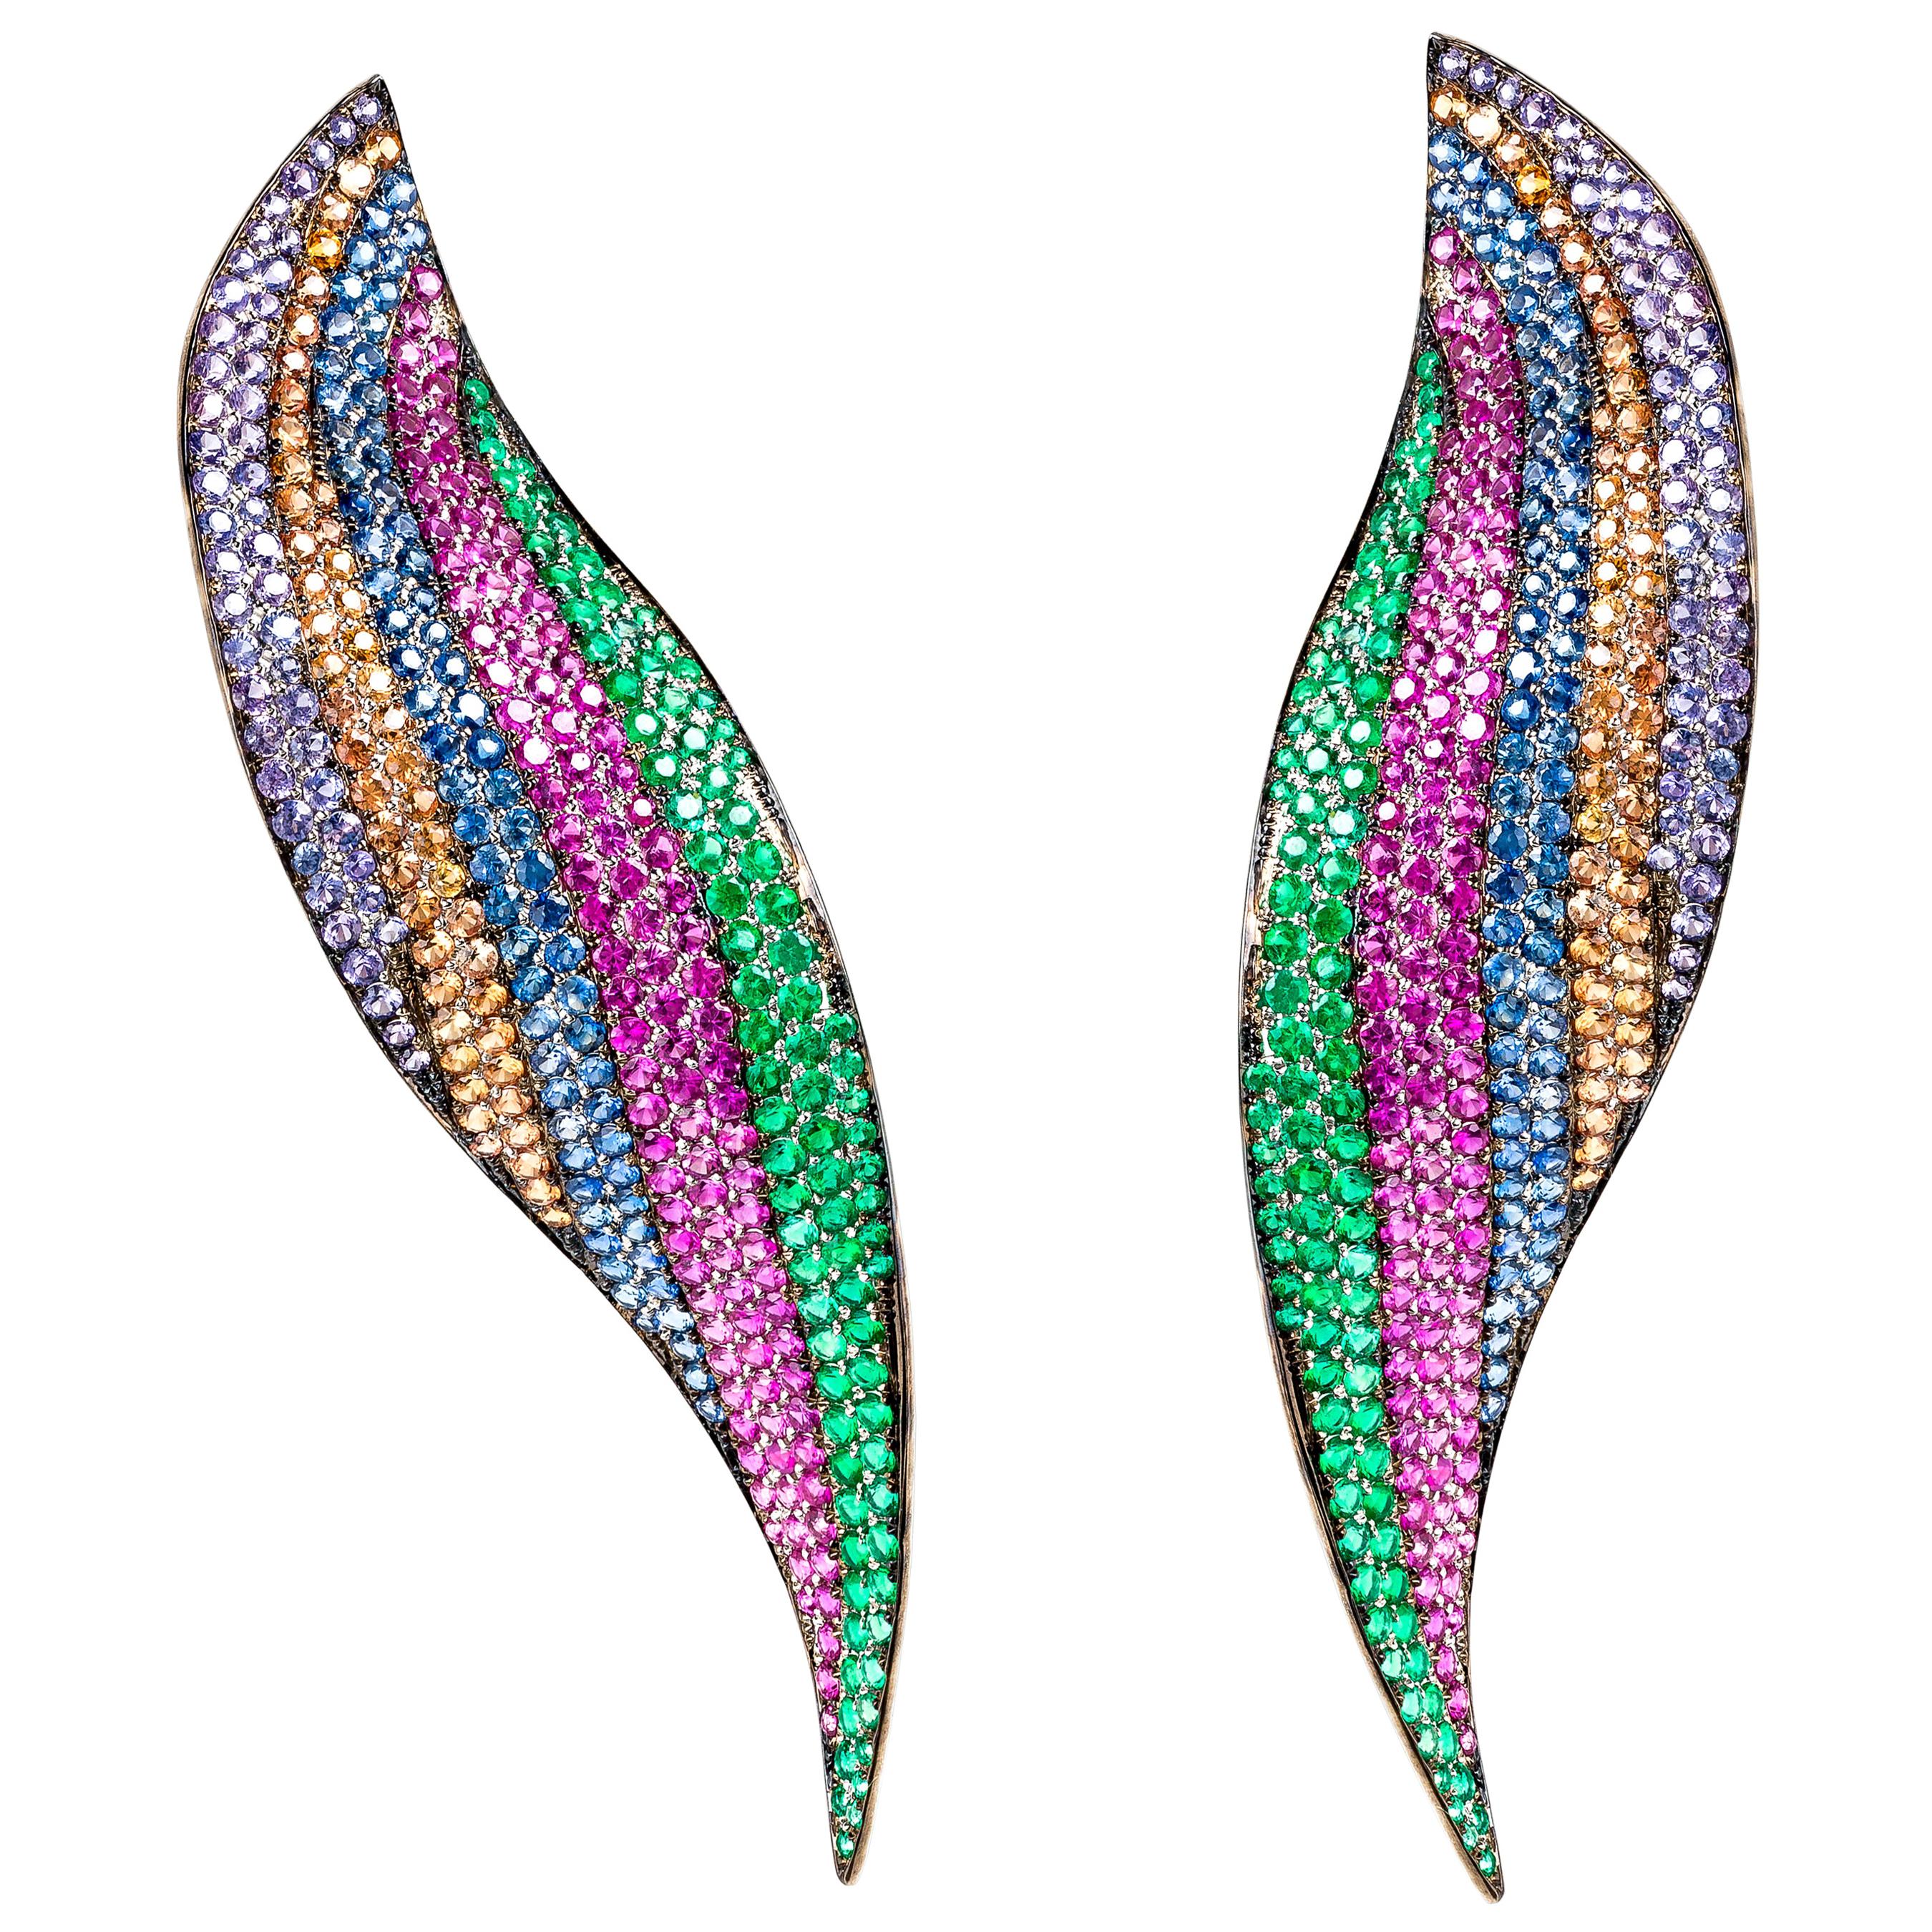 Rosior one-off Multicolor Gemstone "Long Leaf" Earrings set in White Gold